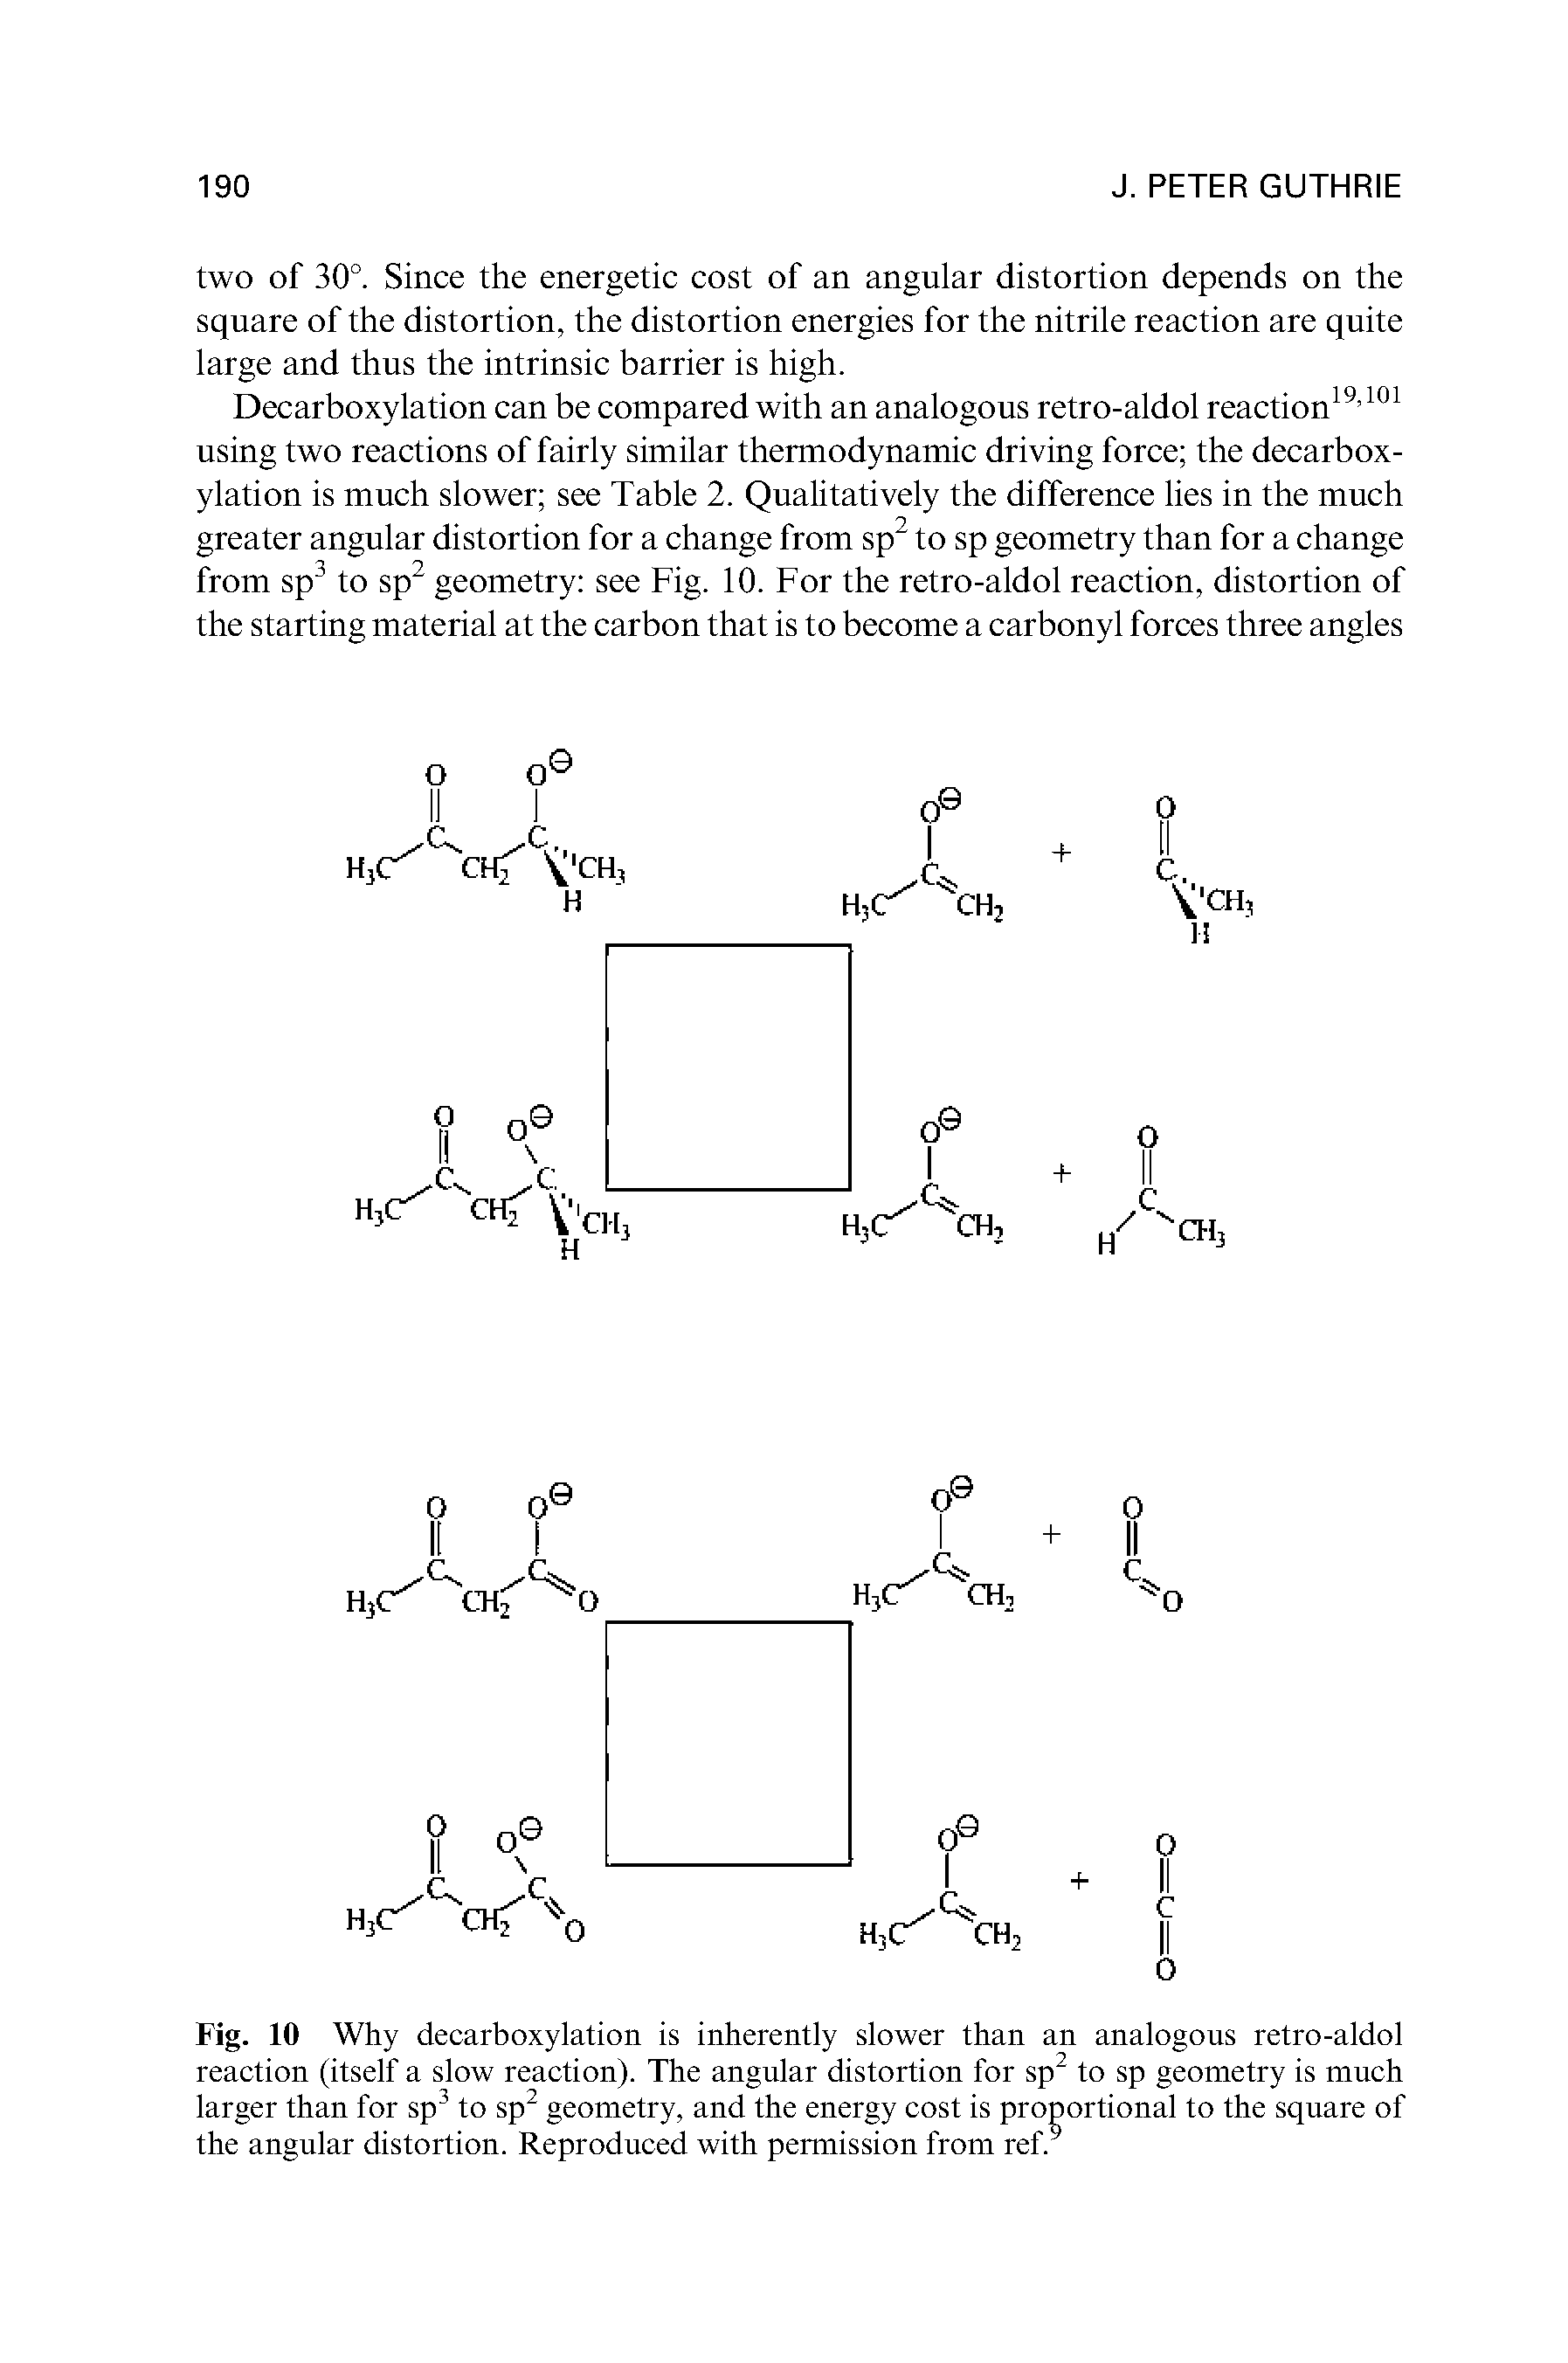 Fig. 10 Why decarboxylation is inherently slower than an analogous retro-aldol reaction (itself a slow reaction). The angular distortion for sp2 to sp geometry is much larger than for sp3 to sp2 geometry, and the energy cost is proportional to the square of the angular distortion. Reproduced with permission from ref.9...